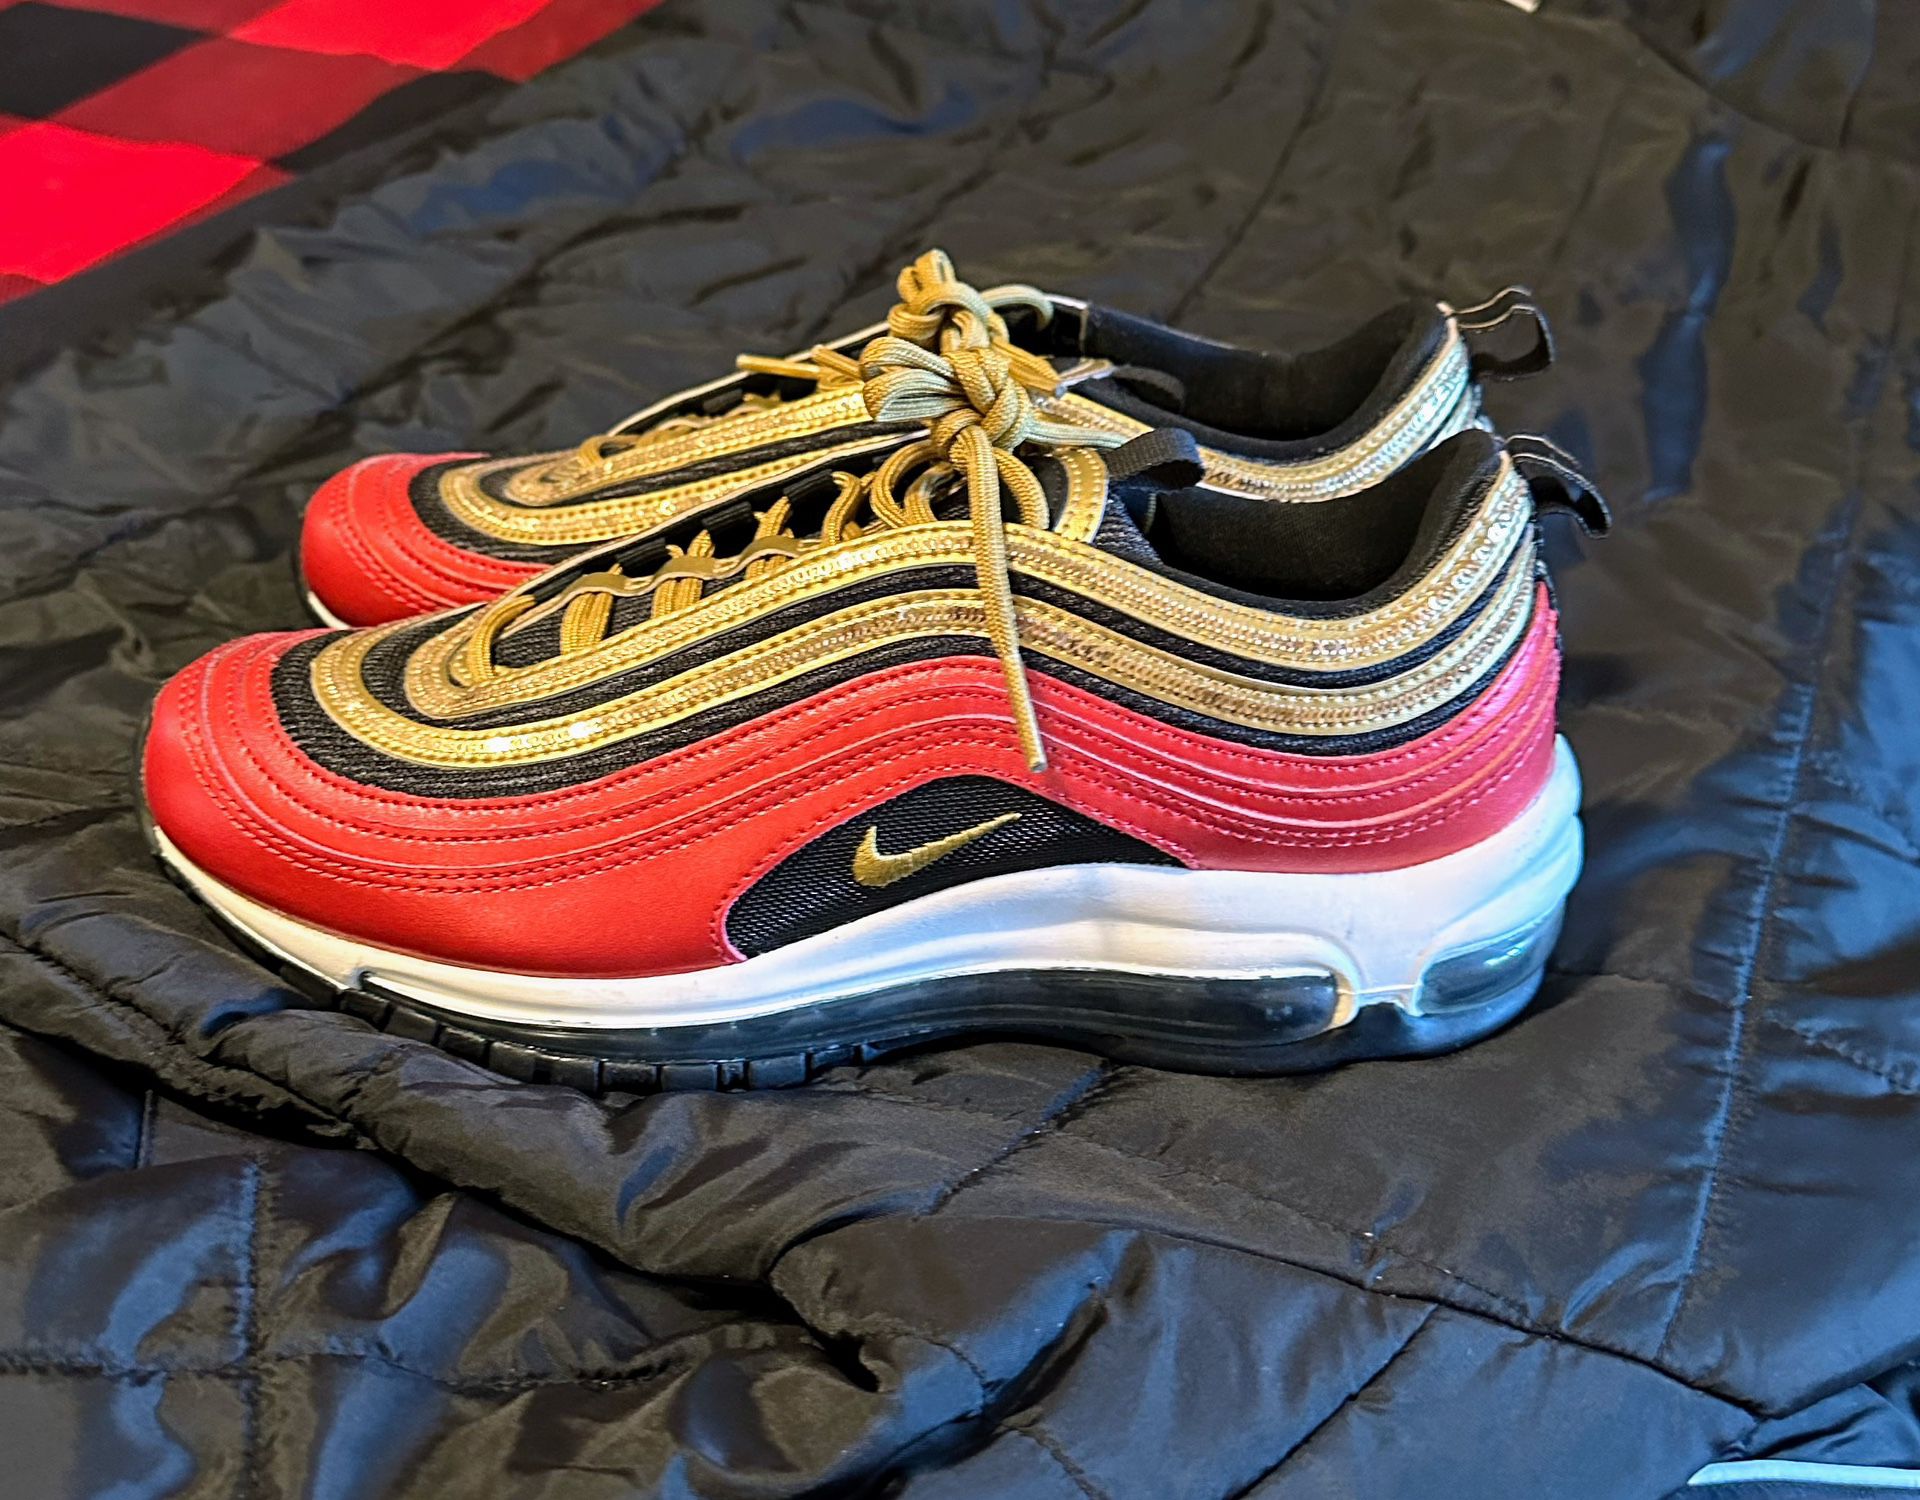 Nike Air Max 97 Women’s Shoes Size 8.5